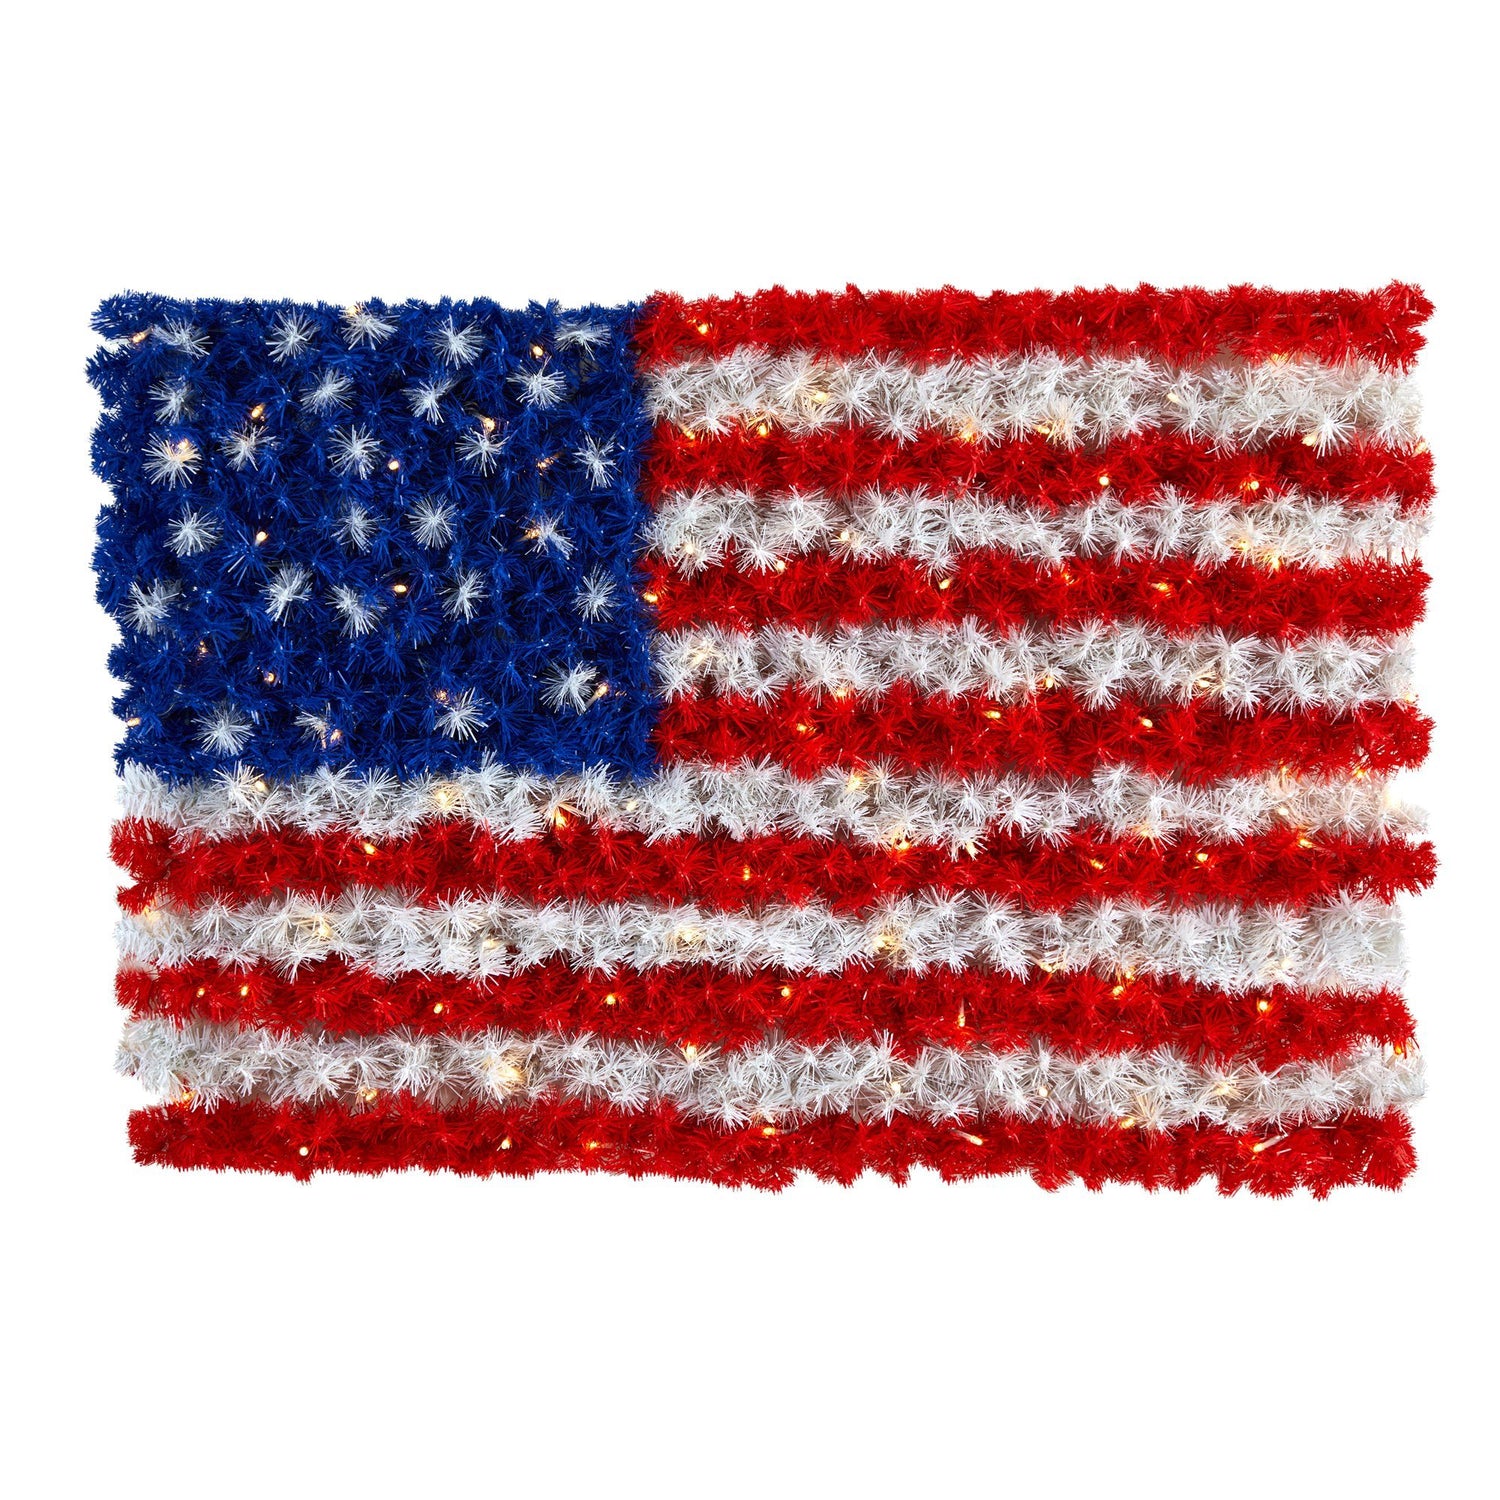 3’ x 2’ Red, White, and Blue “American Flag” Wall Panel with 100 Warm LED Lights (Indoor/Outdoor)